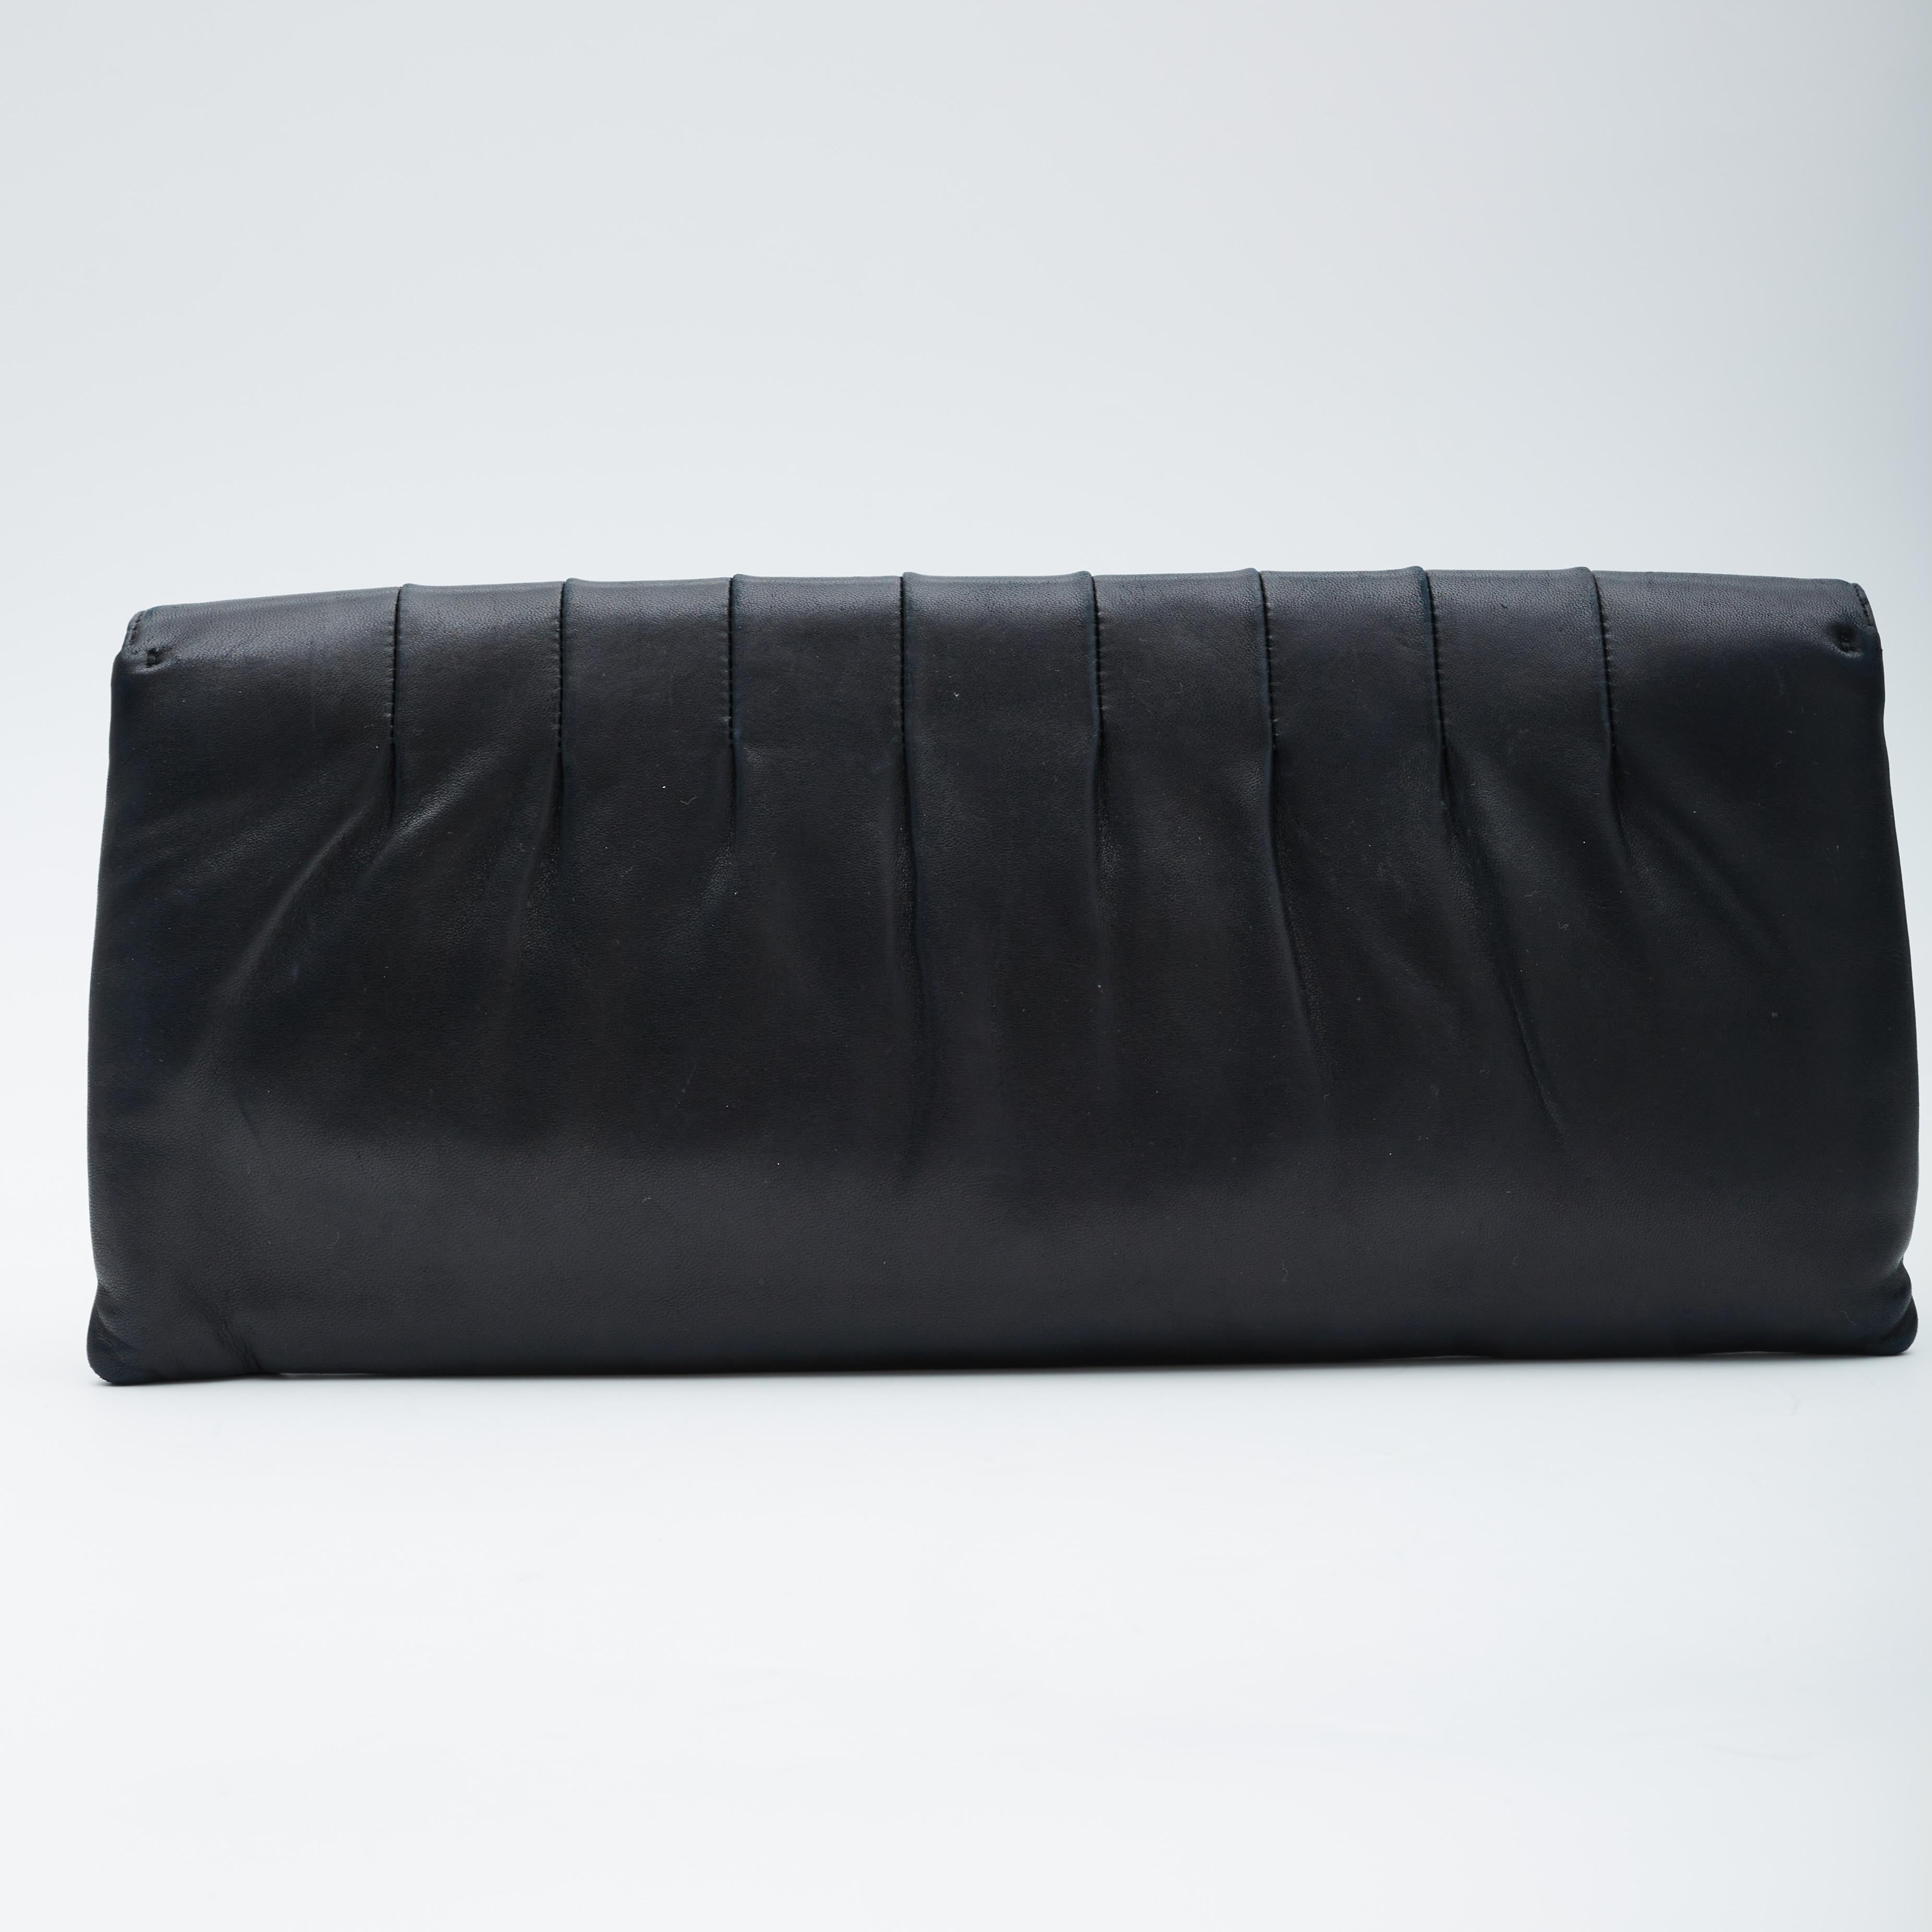 Chanel Black Lambskin Clutch 2002 Fold Clasp In Good Condition For Sale In Montreal, Quebec